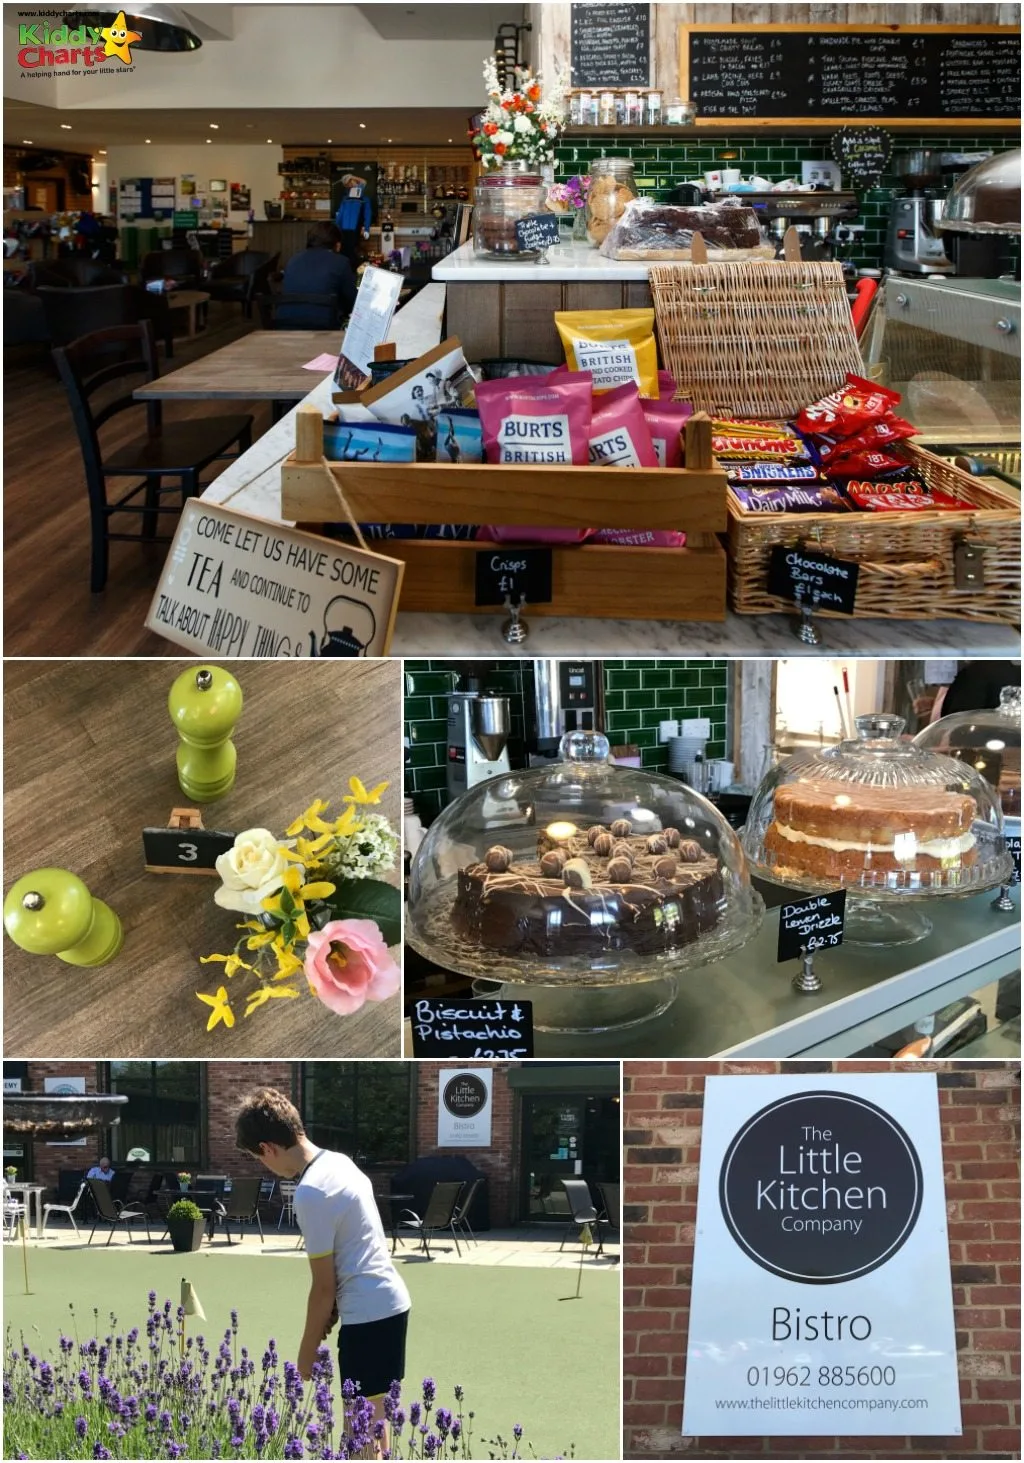 What did we think of the Little Kitchen Bistro Winchester for our family lunch? Read the blog to find out, and watch out for those cakes!